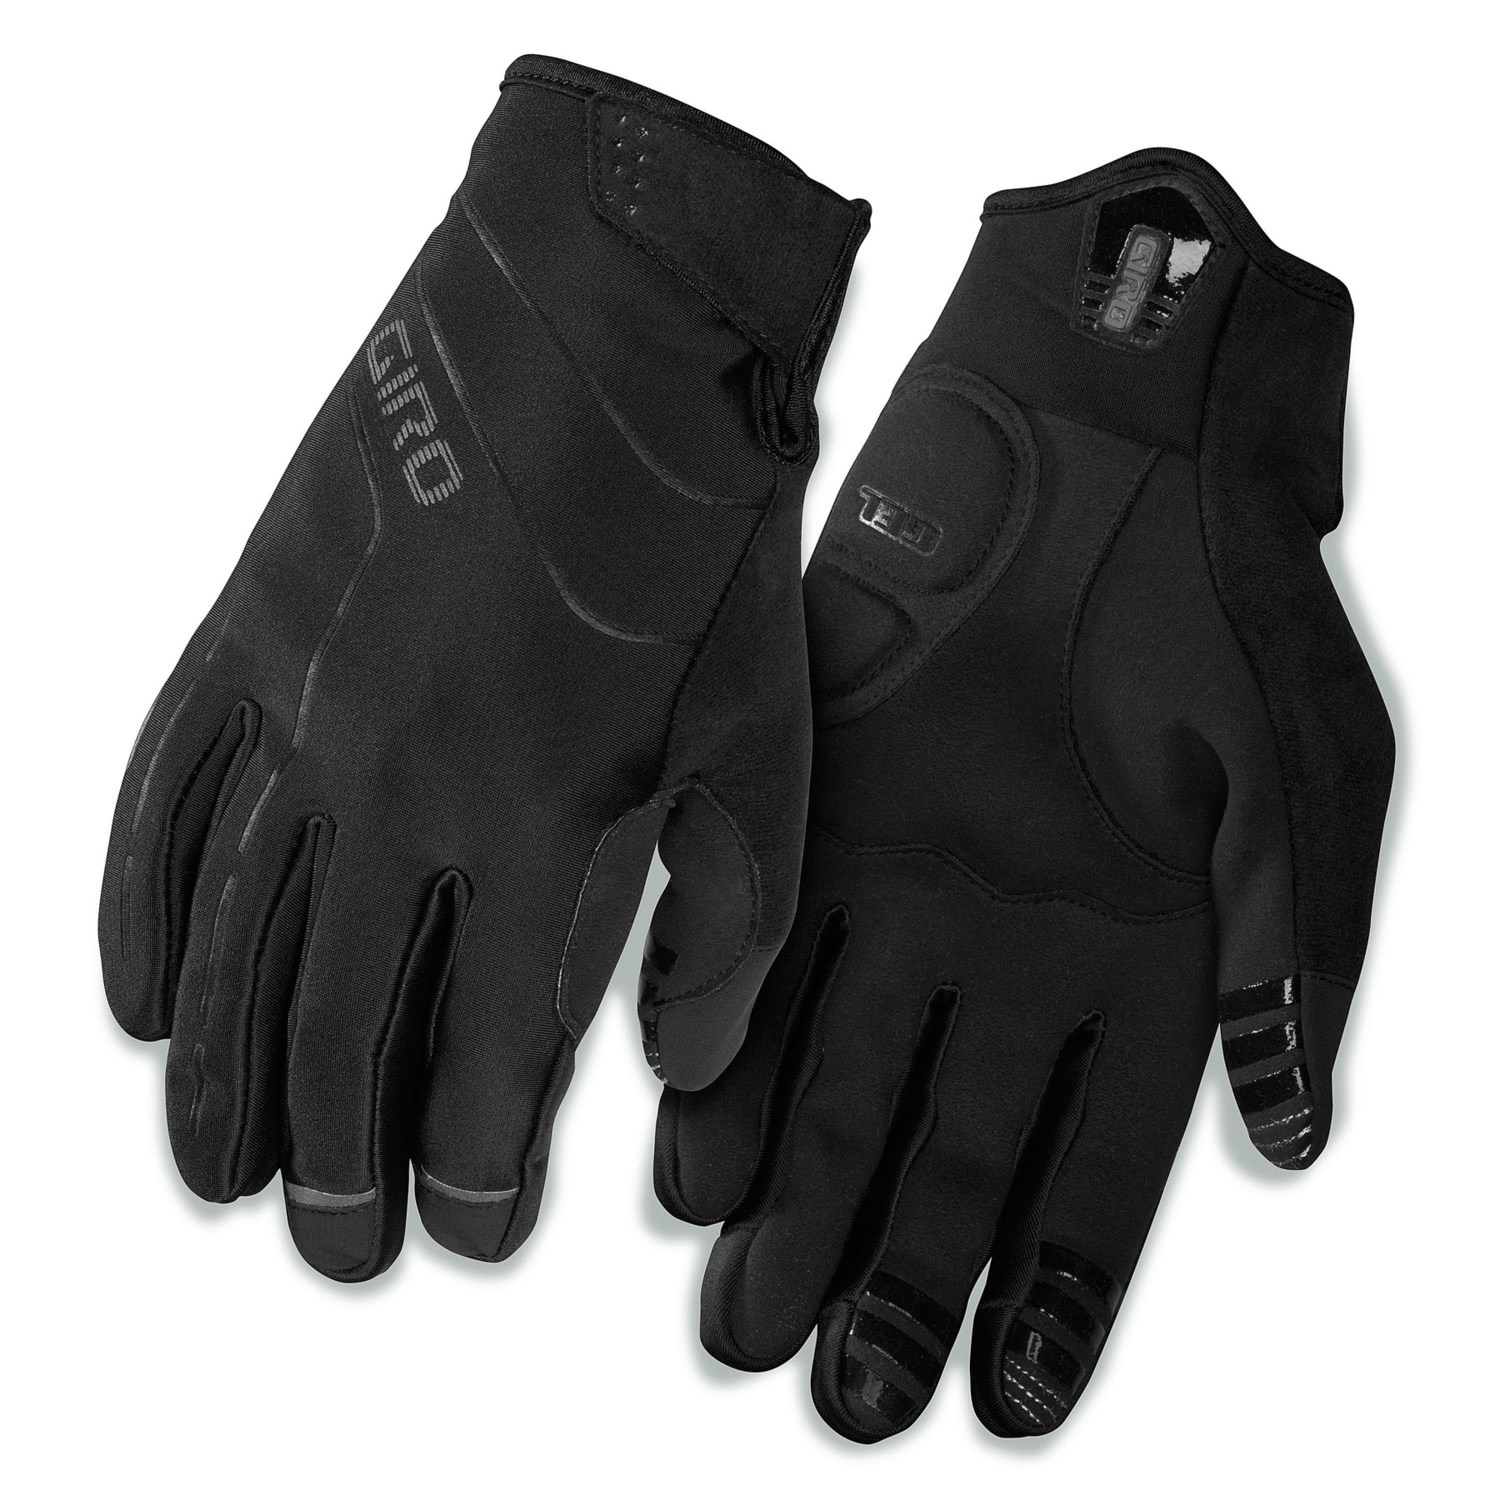 Giro Ambient Cycling Gloves (For Men) 7786G - Save 40%